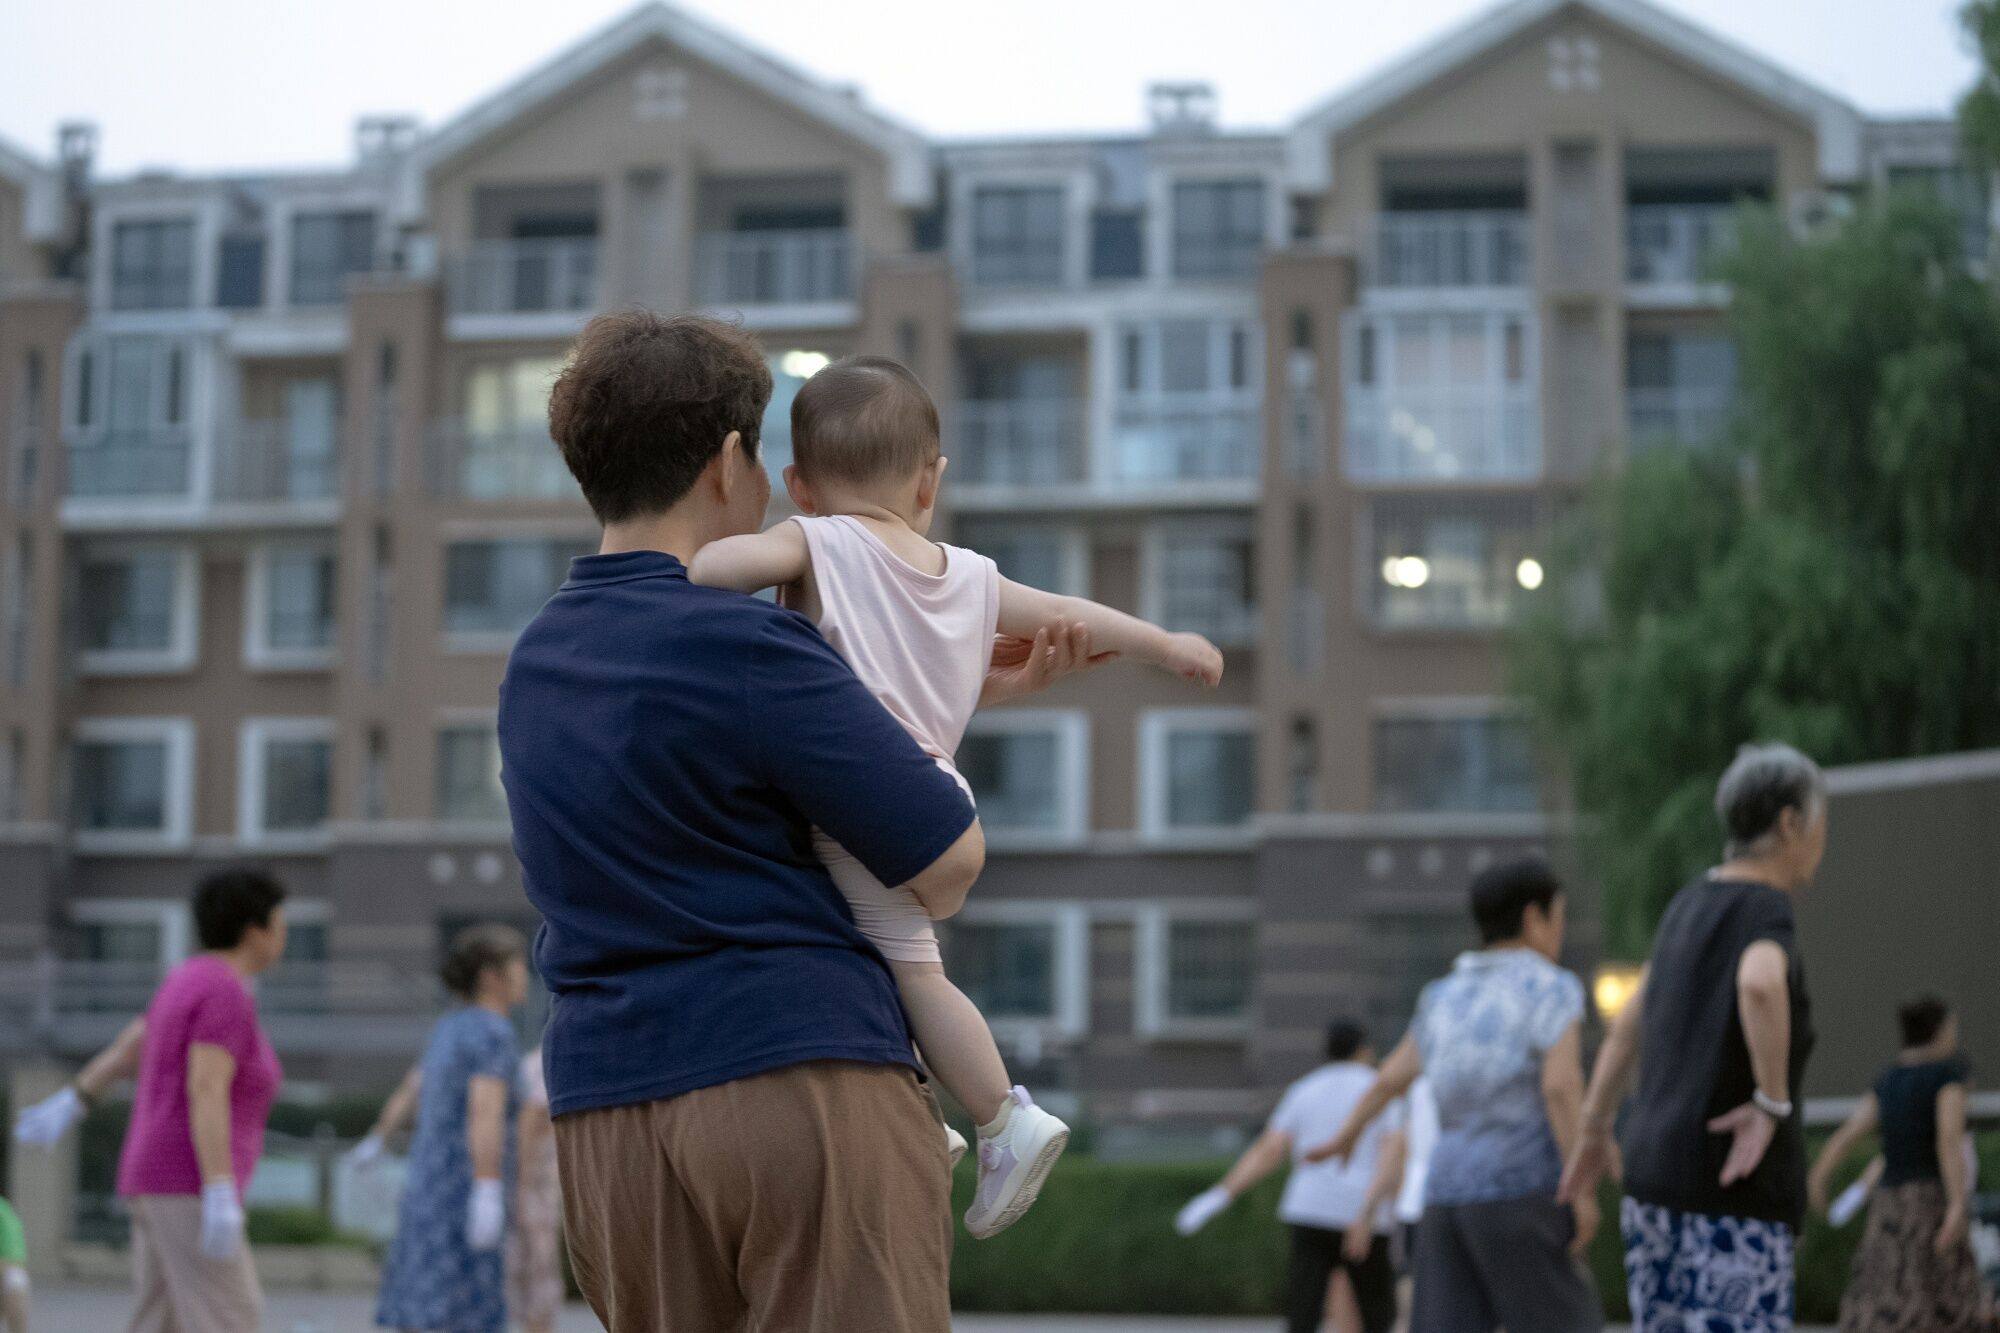 A woman carries a child at a park in Beijing. China’s population shrank by 2 million people last year, a trend that looks set to continue. Photo: Bloomberg